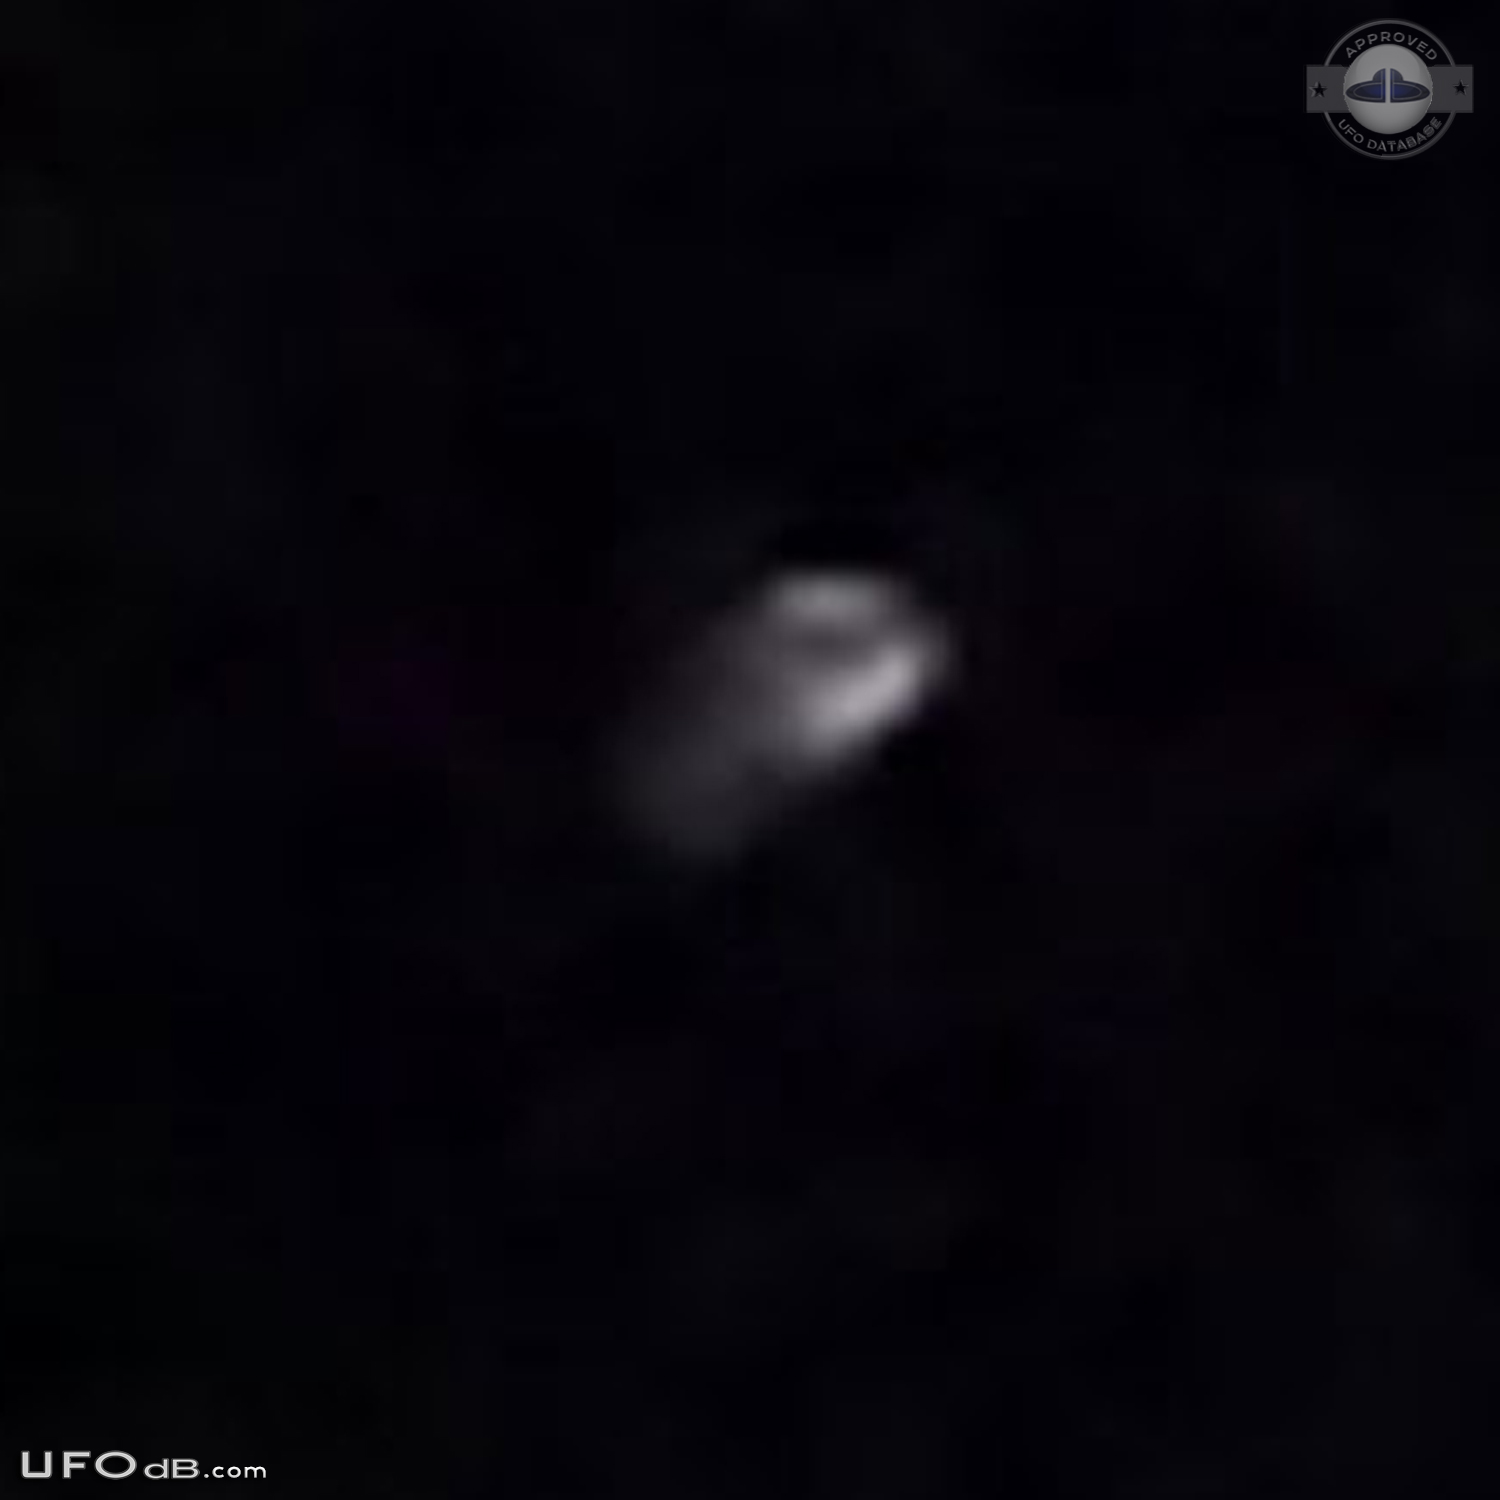 UFO with tentacles with reddish color seen over Magee, Mississipi 2014 UFO Picture #561-5